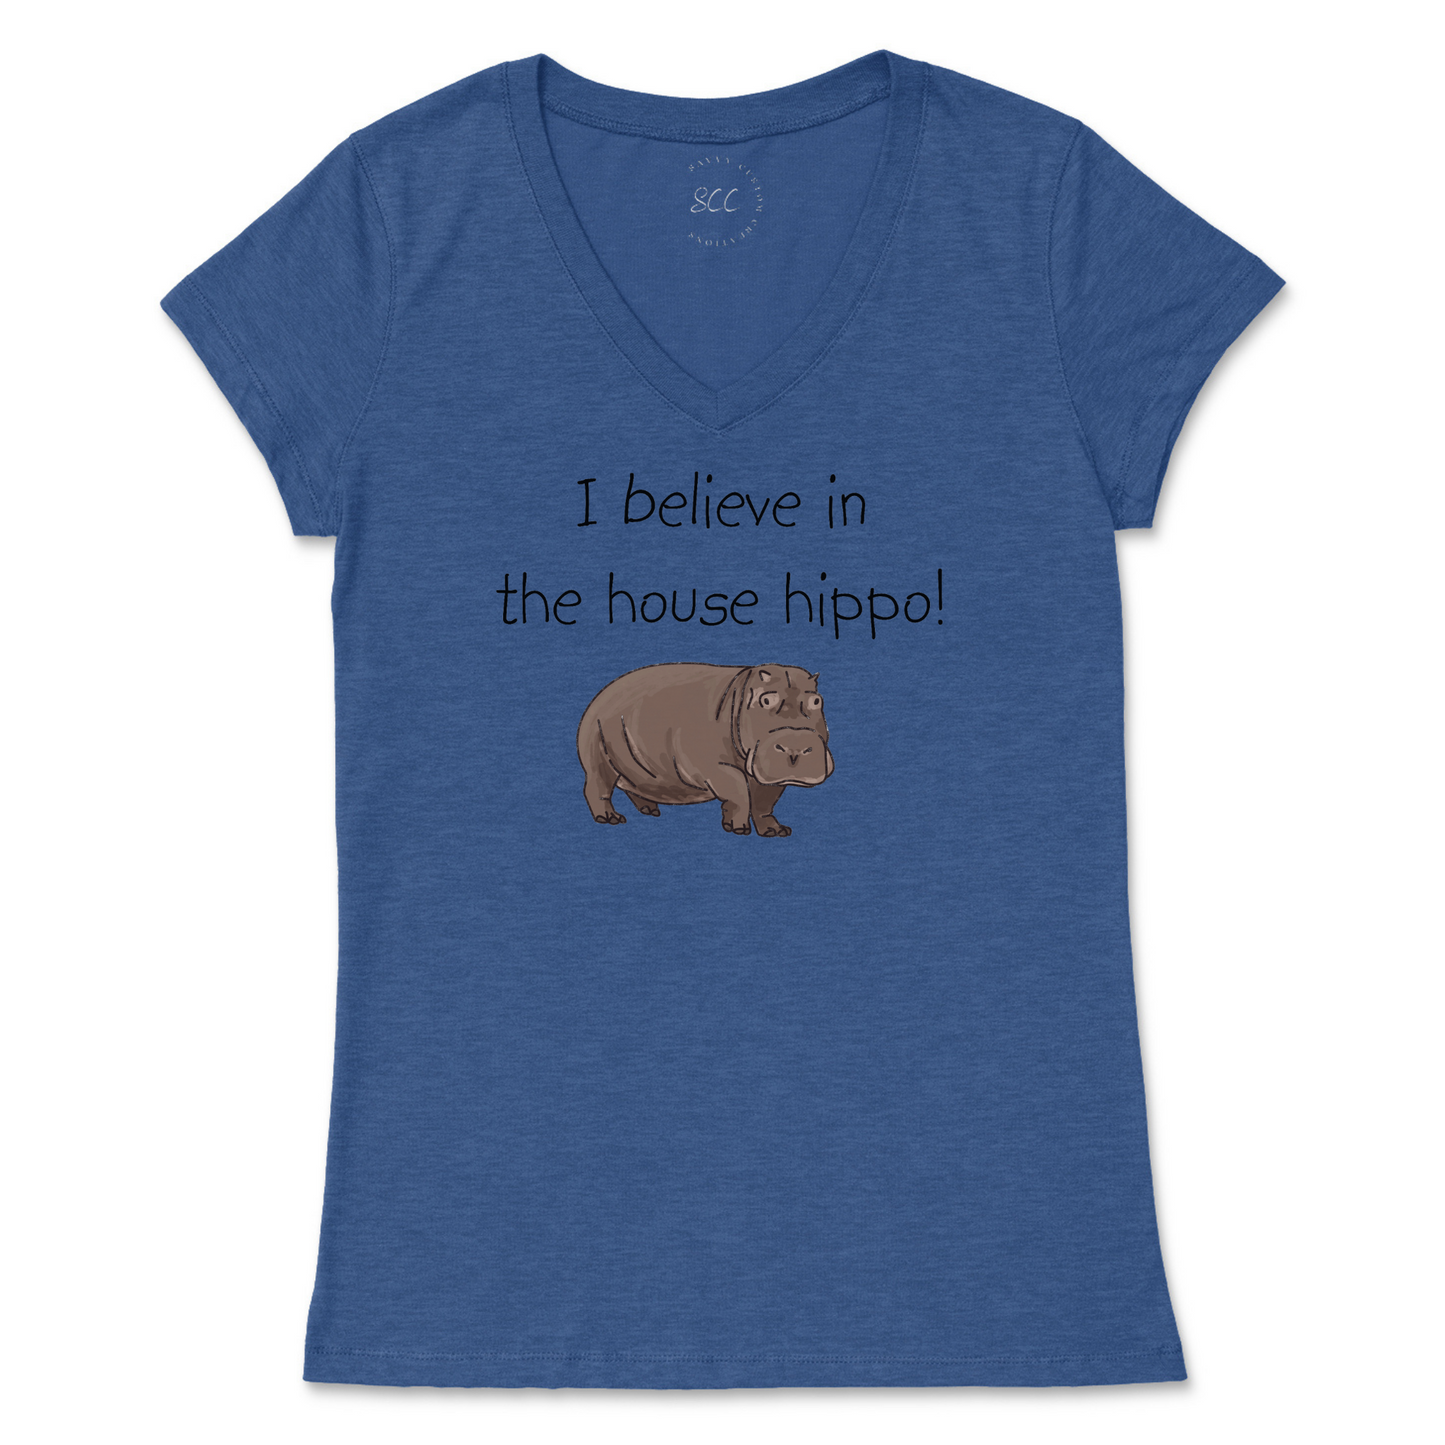 I BELIEVE IN THE HOUSE HIPPO! - Women’s Vneck T-Shirt